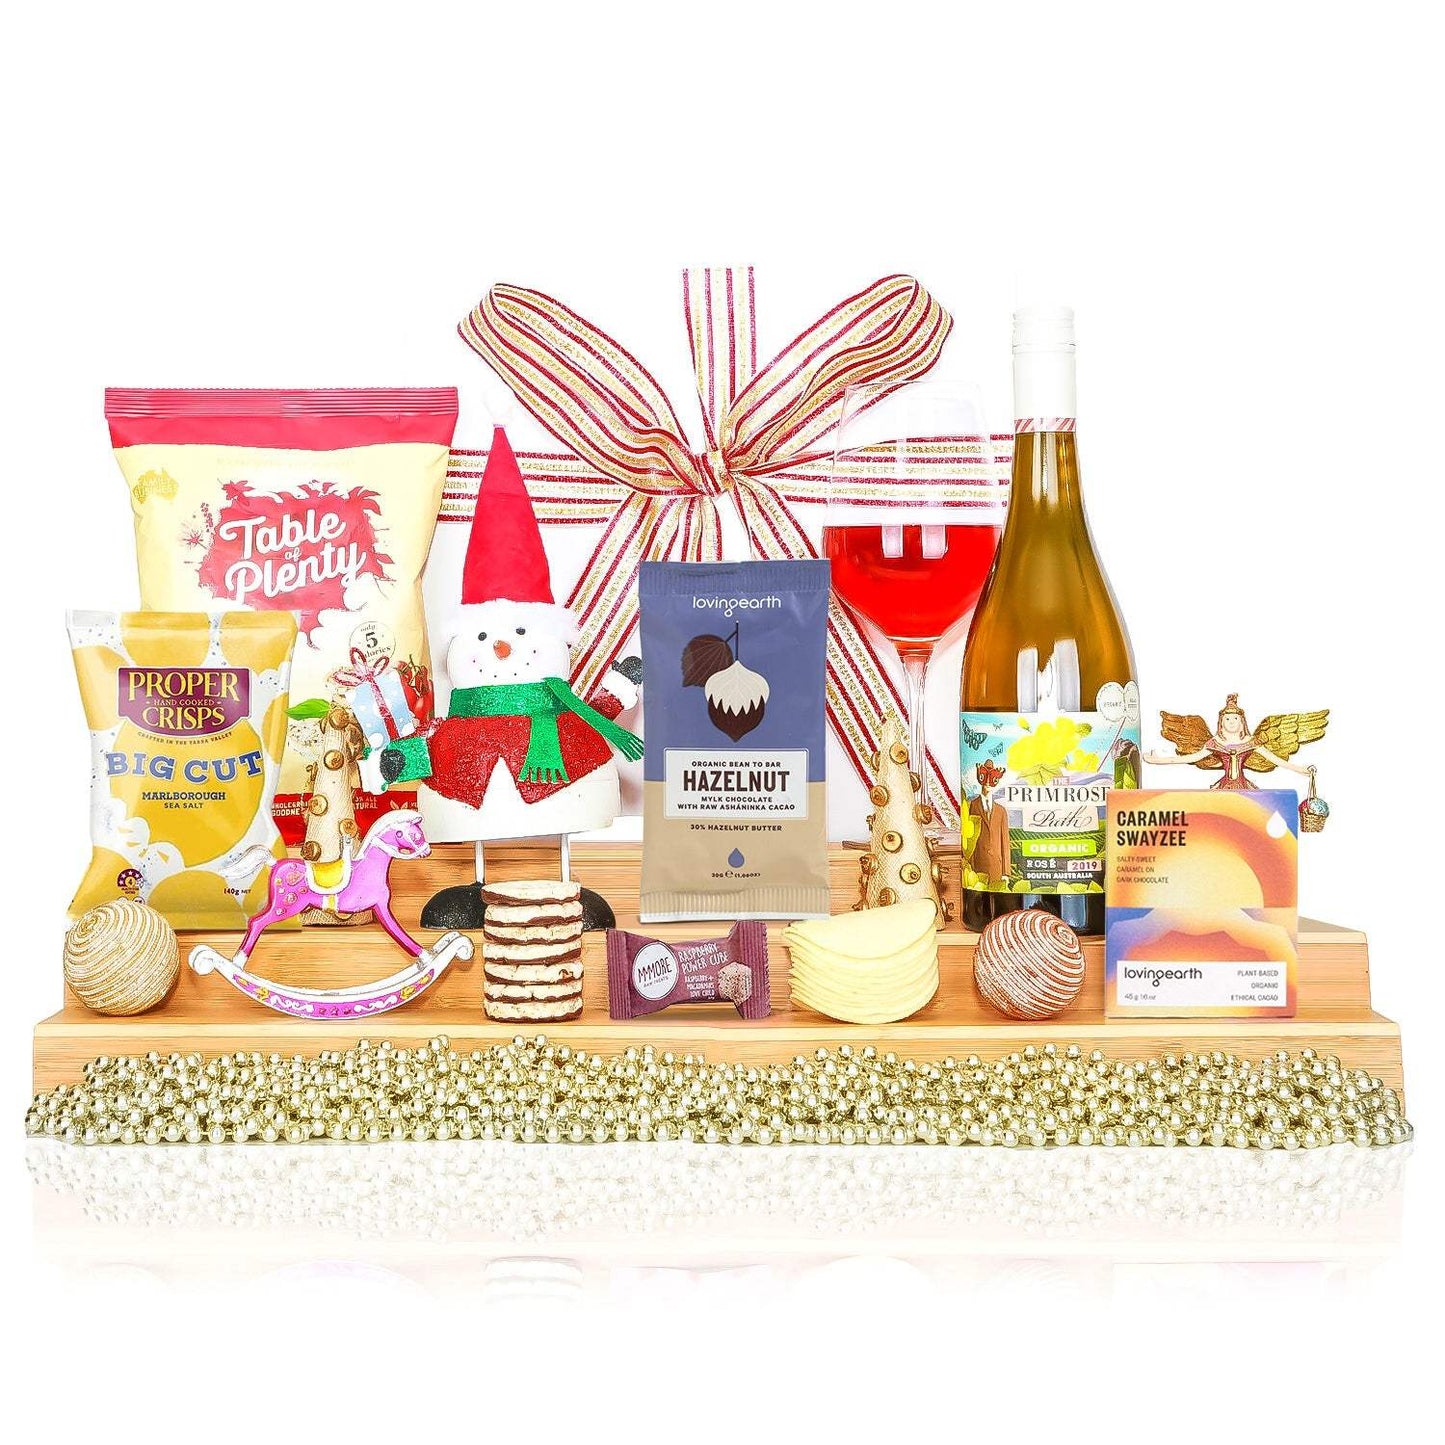 Mrs. Claus - Healthy Belly Hampers - pure indulgence - birthday hampers - gift hampers - gift hampers melbourne - gift hampers australia - organic hampers -vegan hampers - gluten free hampers - birthday hampers -anniversary hampers - wedding hampers - alcohol hampers